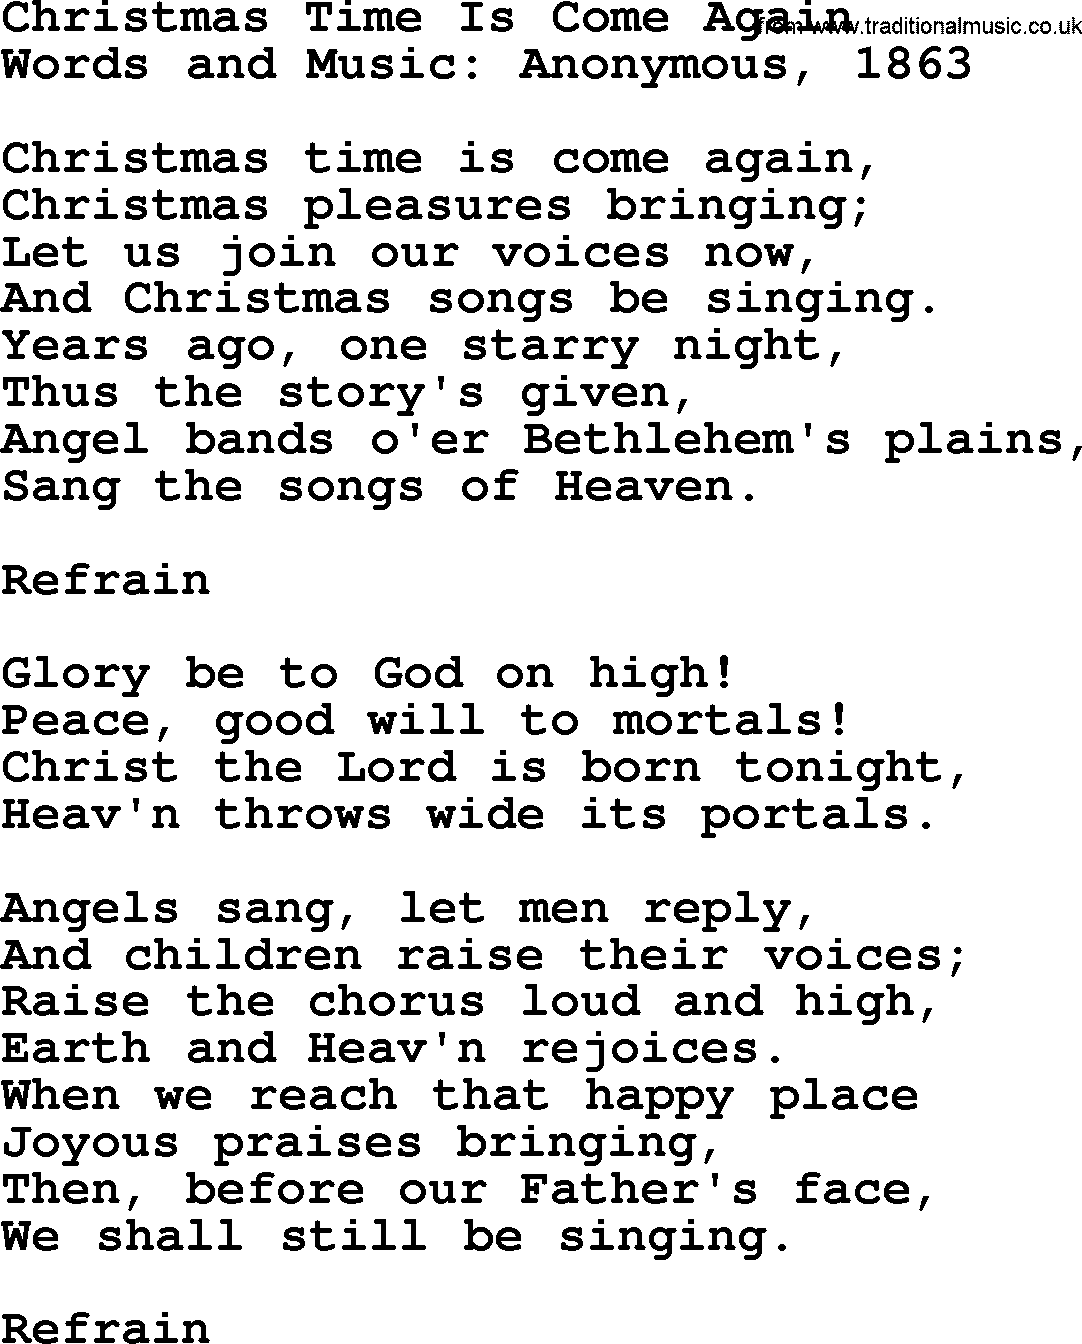 280 Christmas Hymns and songs with PowerPoints and PDF, title: Christmas Time Is Come Again, lyrics, PPT and PDF